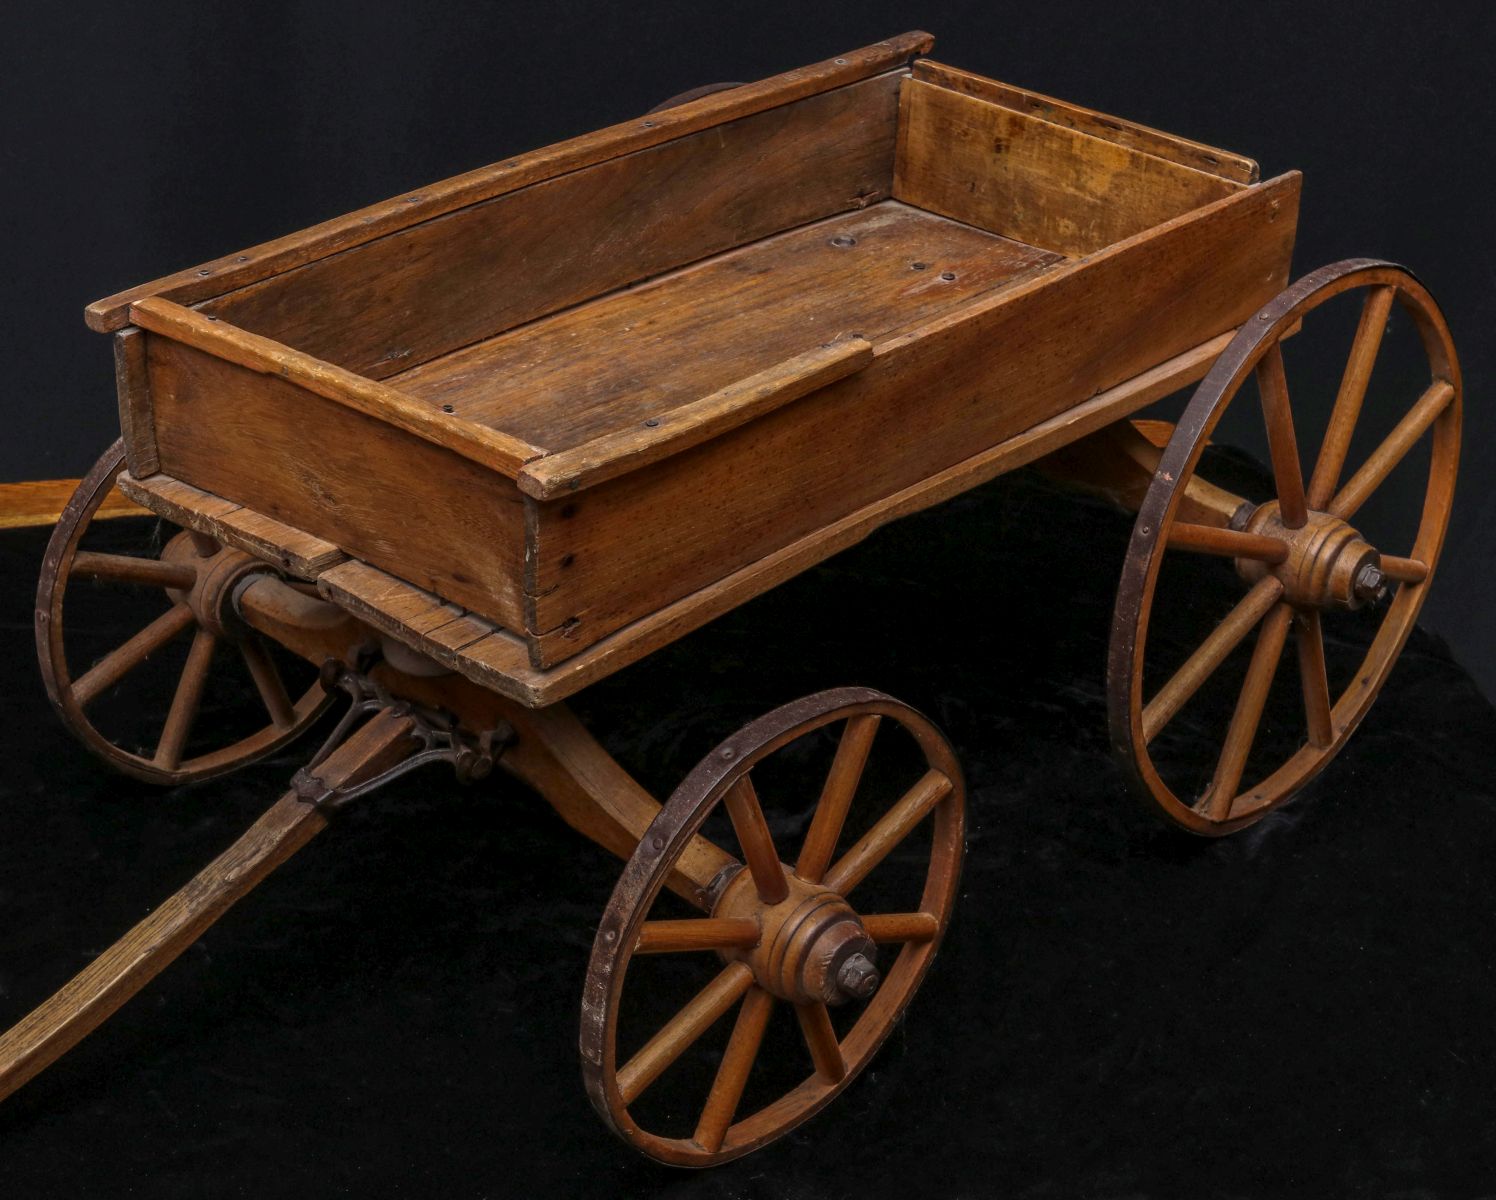 AN ANTIQUE CHILD'S COASTER WAGON WITH WOOD SPOKE WHEELS